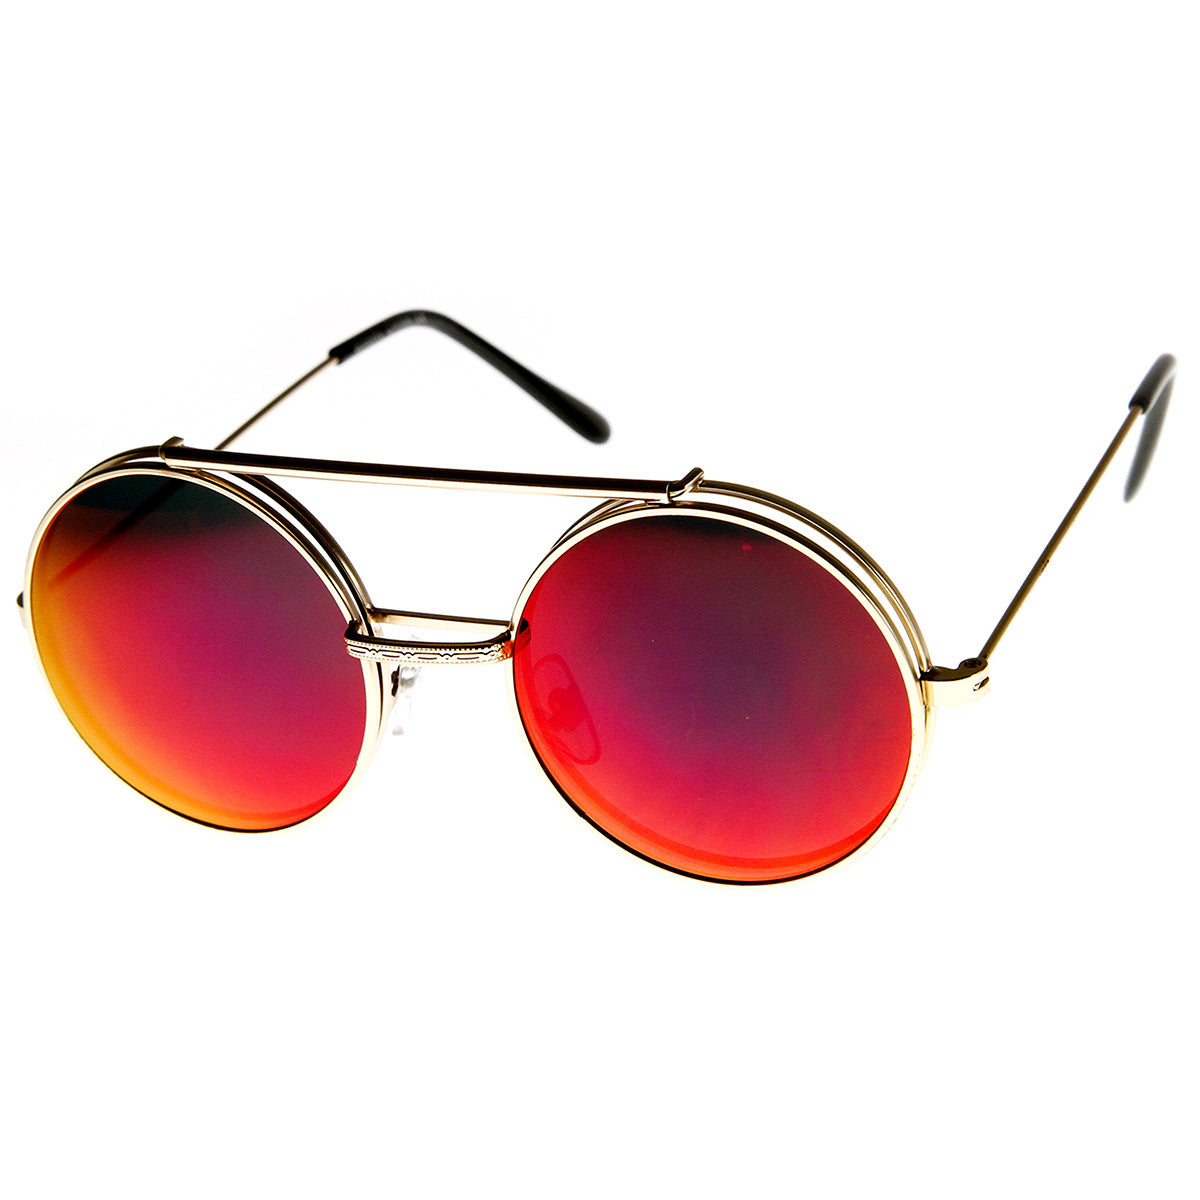 Guide to Round Sunglasses for Men, Guides